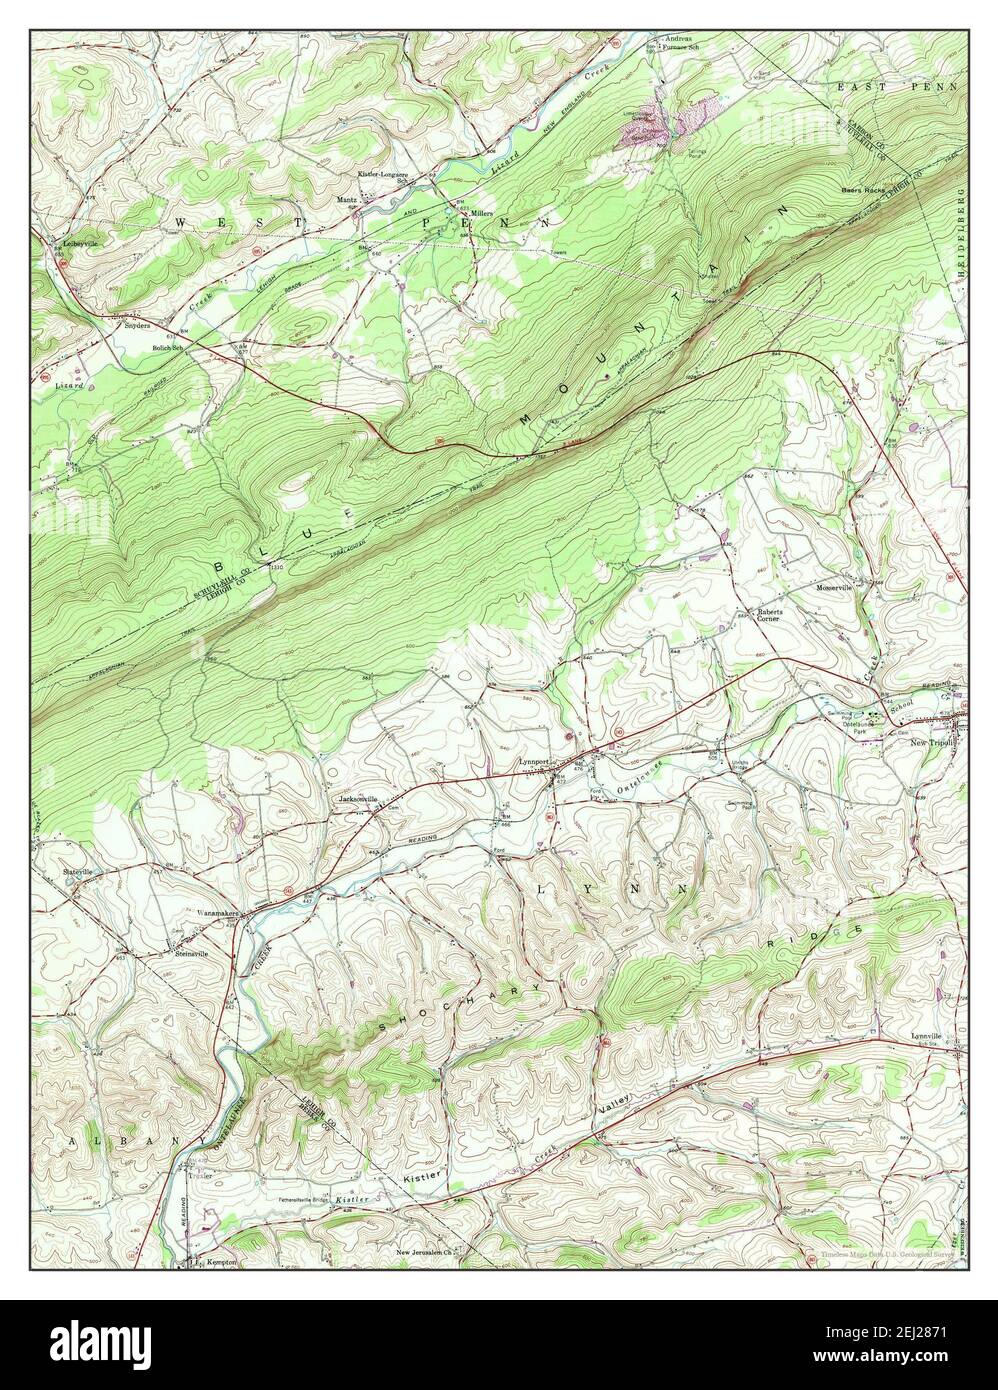 New Tripoli, Pennsylvania, map 1956, 1:24000, United States of America by Timeless Maps, data U.S. Geological Survey Stock Photo